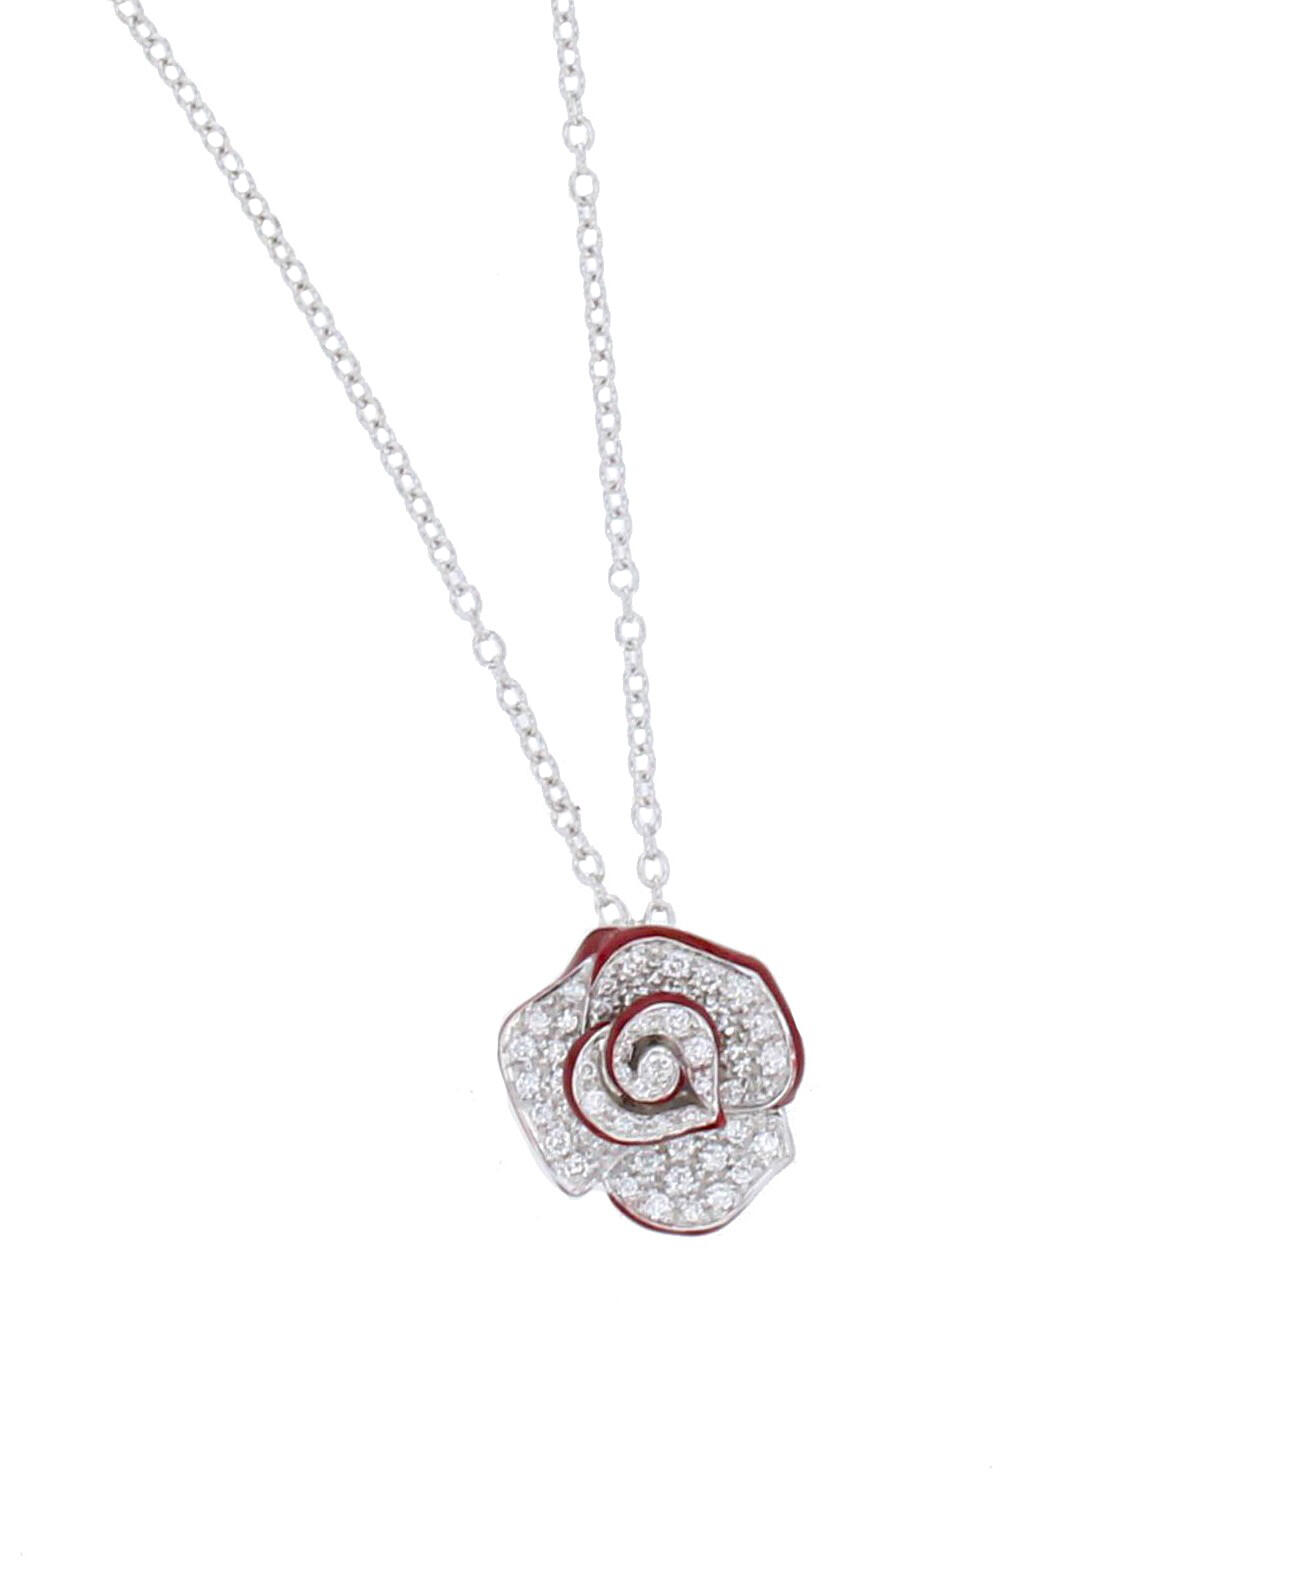 Schroeder Joailliers "Rose of Luxembourg" collection pendant in 18k white gold